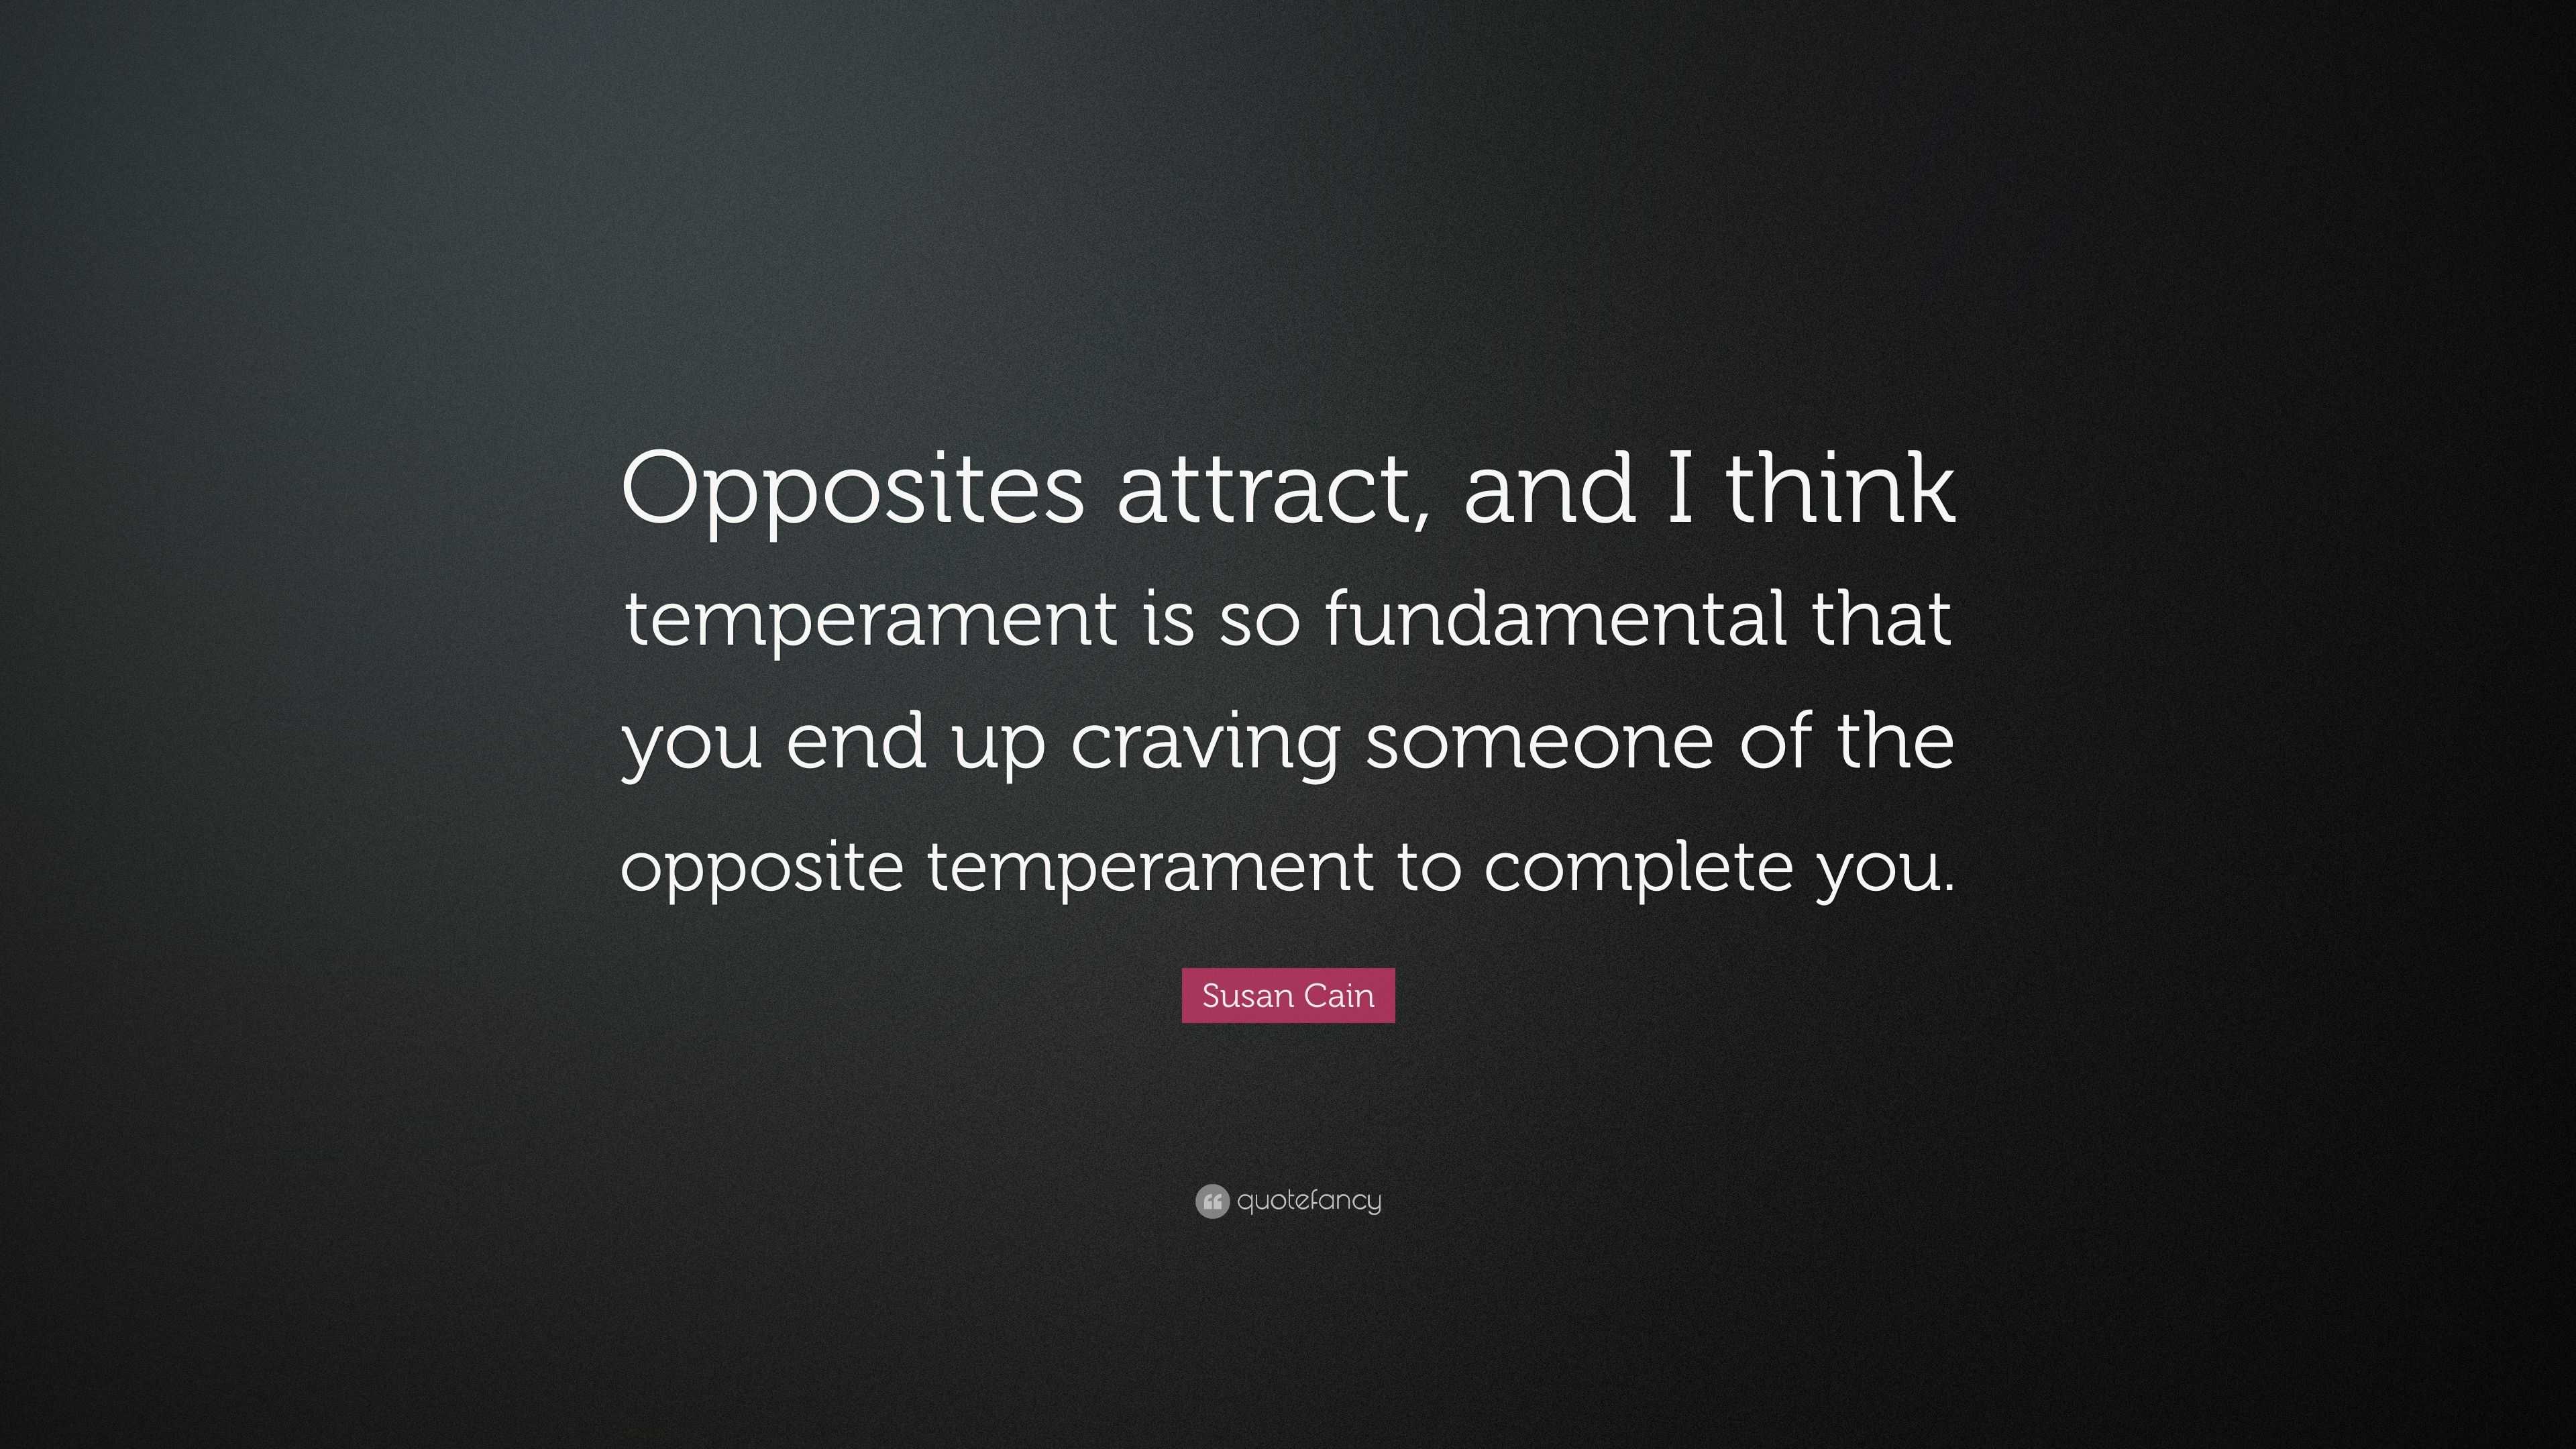 Susan Cain Quote Opposites Attract And I Think Temperament Is So Fundamental That You End Up Craving Someone Of The Opposite Temperament